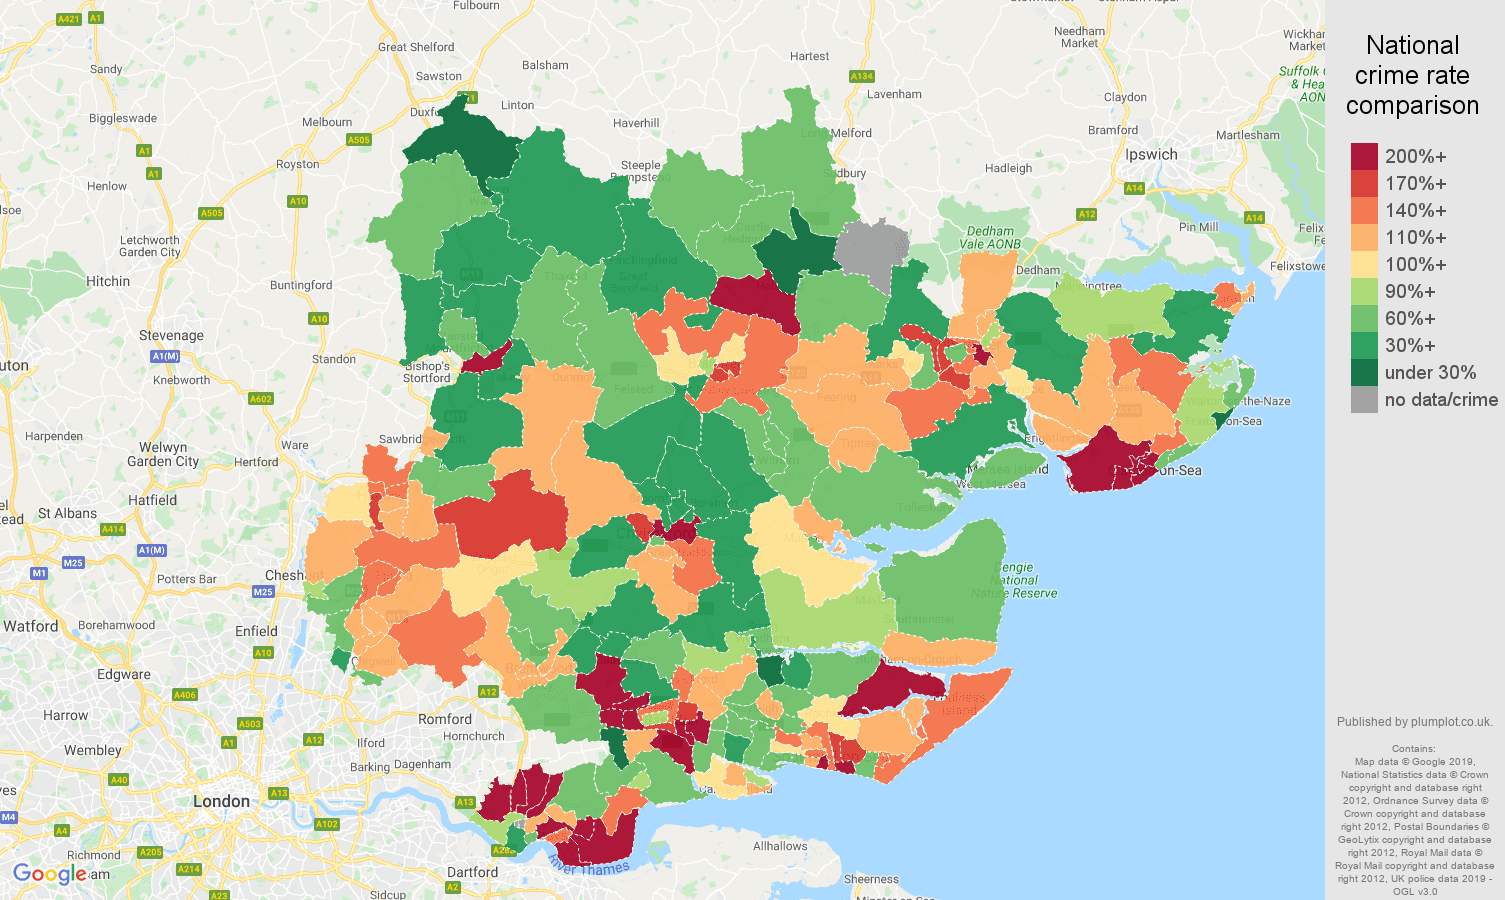 Essex other crime rate comparison map